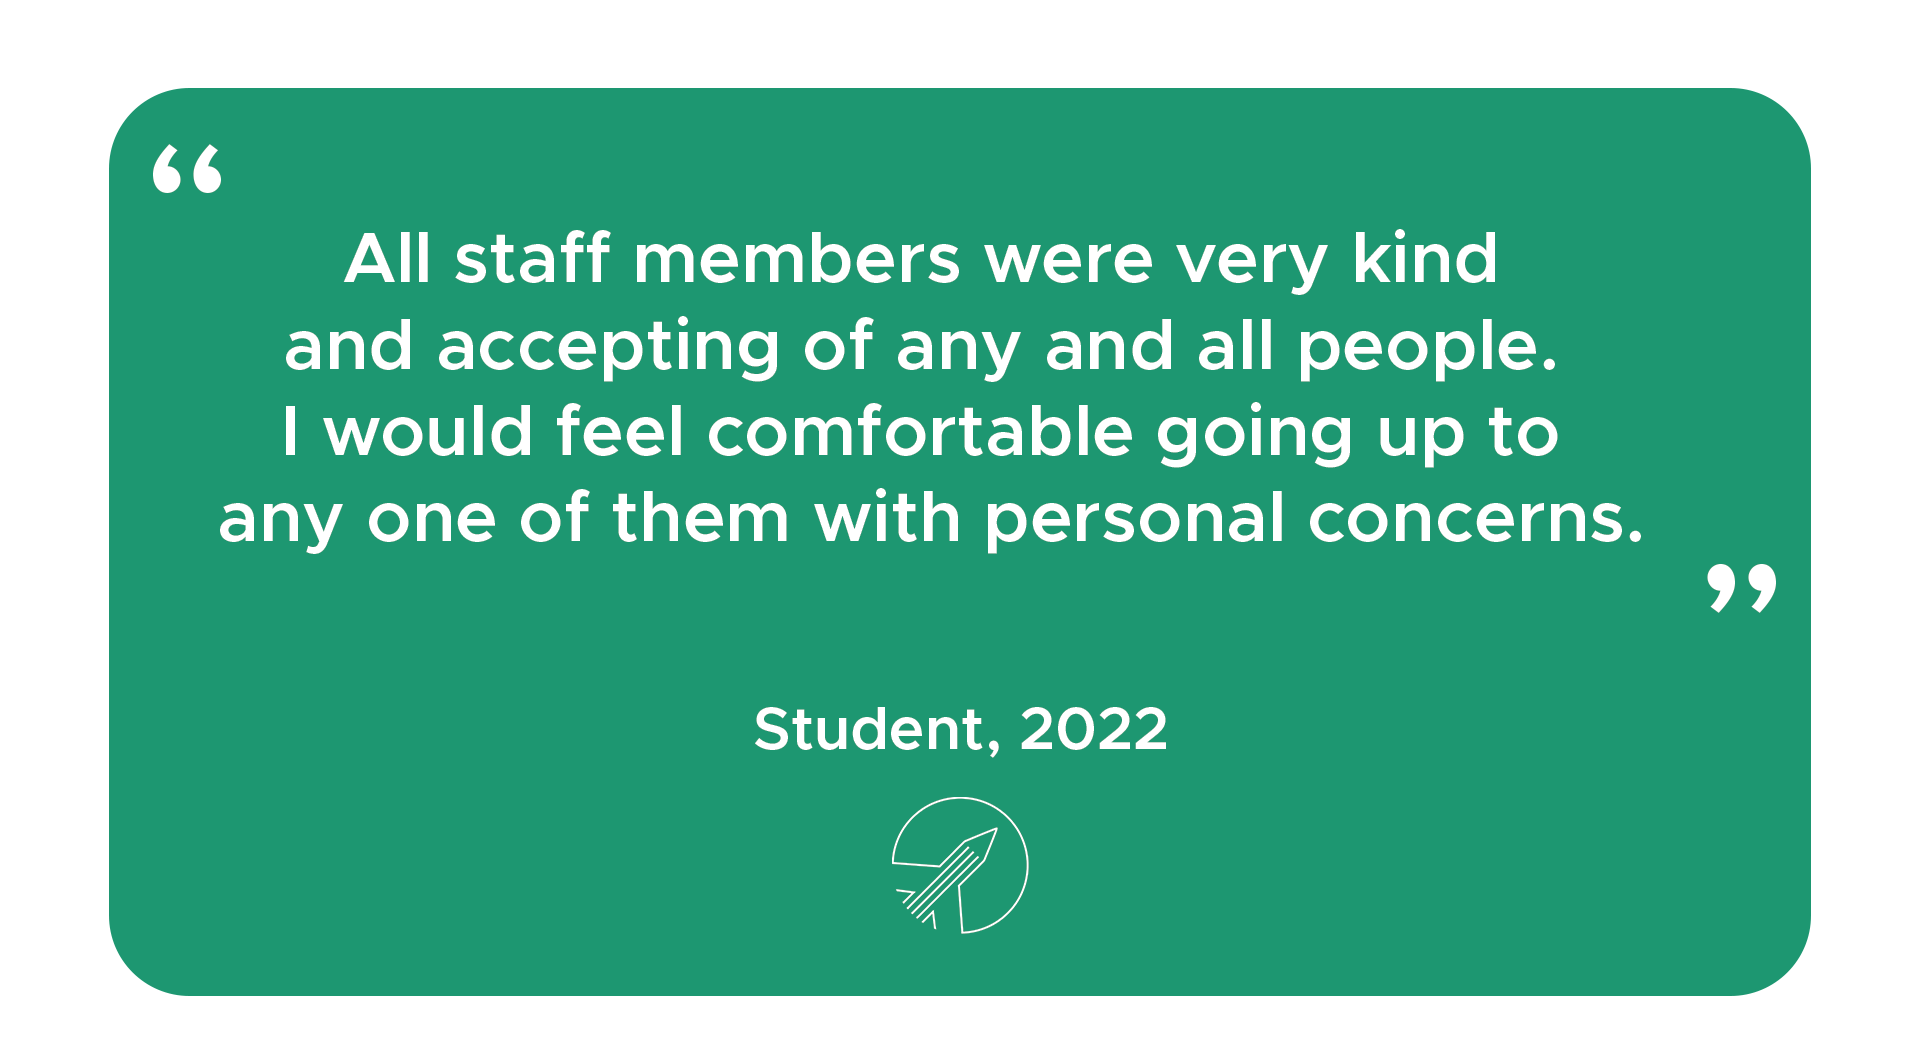 "All staff members were very kind and accepting of any and all people. I would feel comfortable going up to any one of them with personal concerns." - Student, 2022